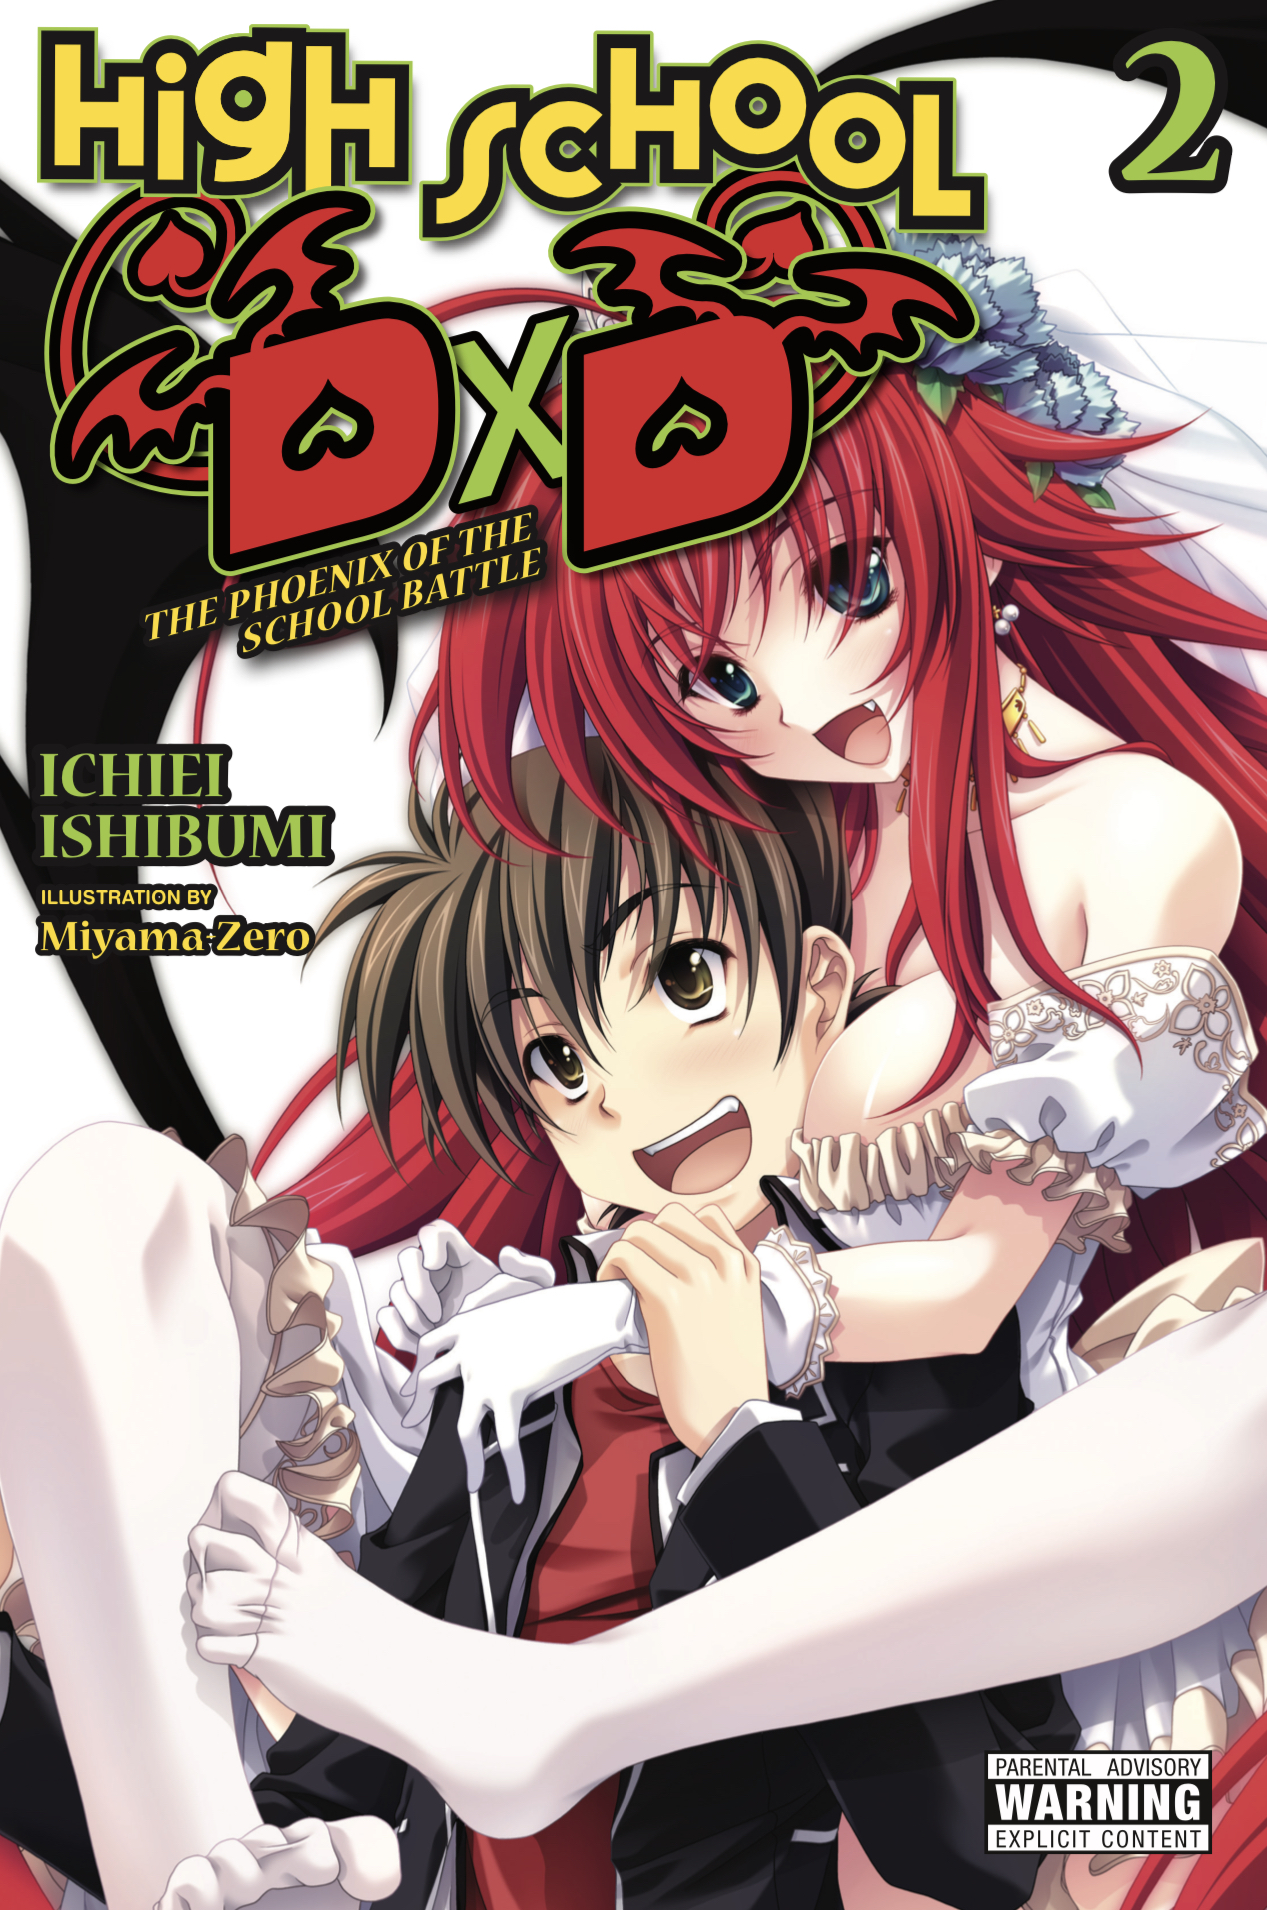 𝑪𝒓𝒊𝒎𝒔𝒐𝒏 𝑻𝒓𝒊𝒖𝒎𝒗𝒊𝒓𝒂𝒕𝒆 𝑹𝑷 on X: @ishibumi_ddd  @office_passione I hope that 2021 will be the year of High School DxD  Season 5!💕 Until it is announced, I made a fan-made poster about Season